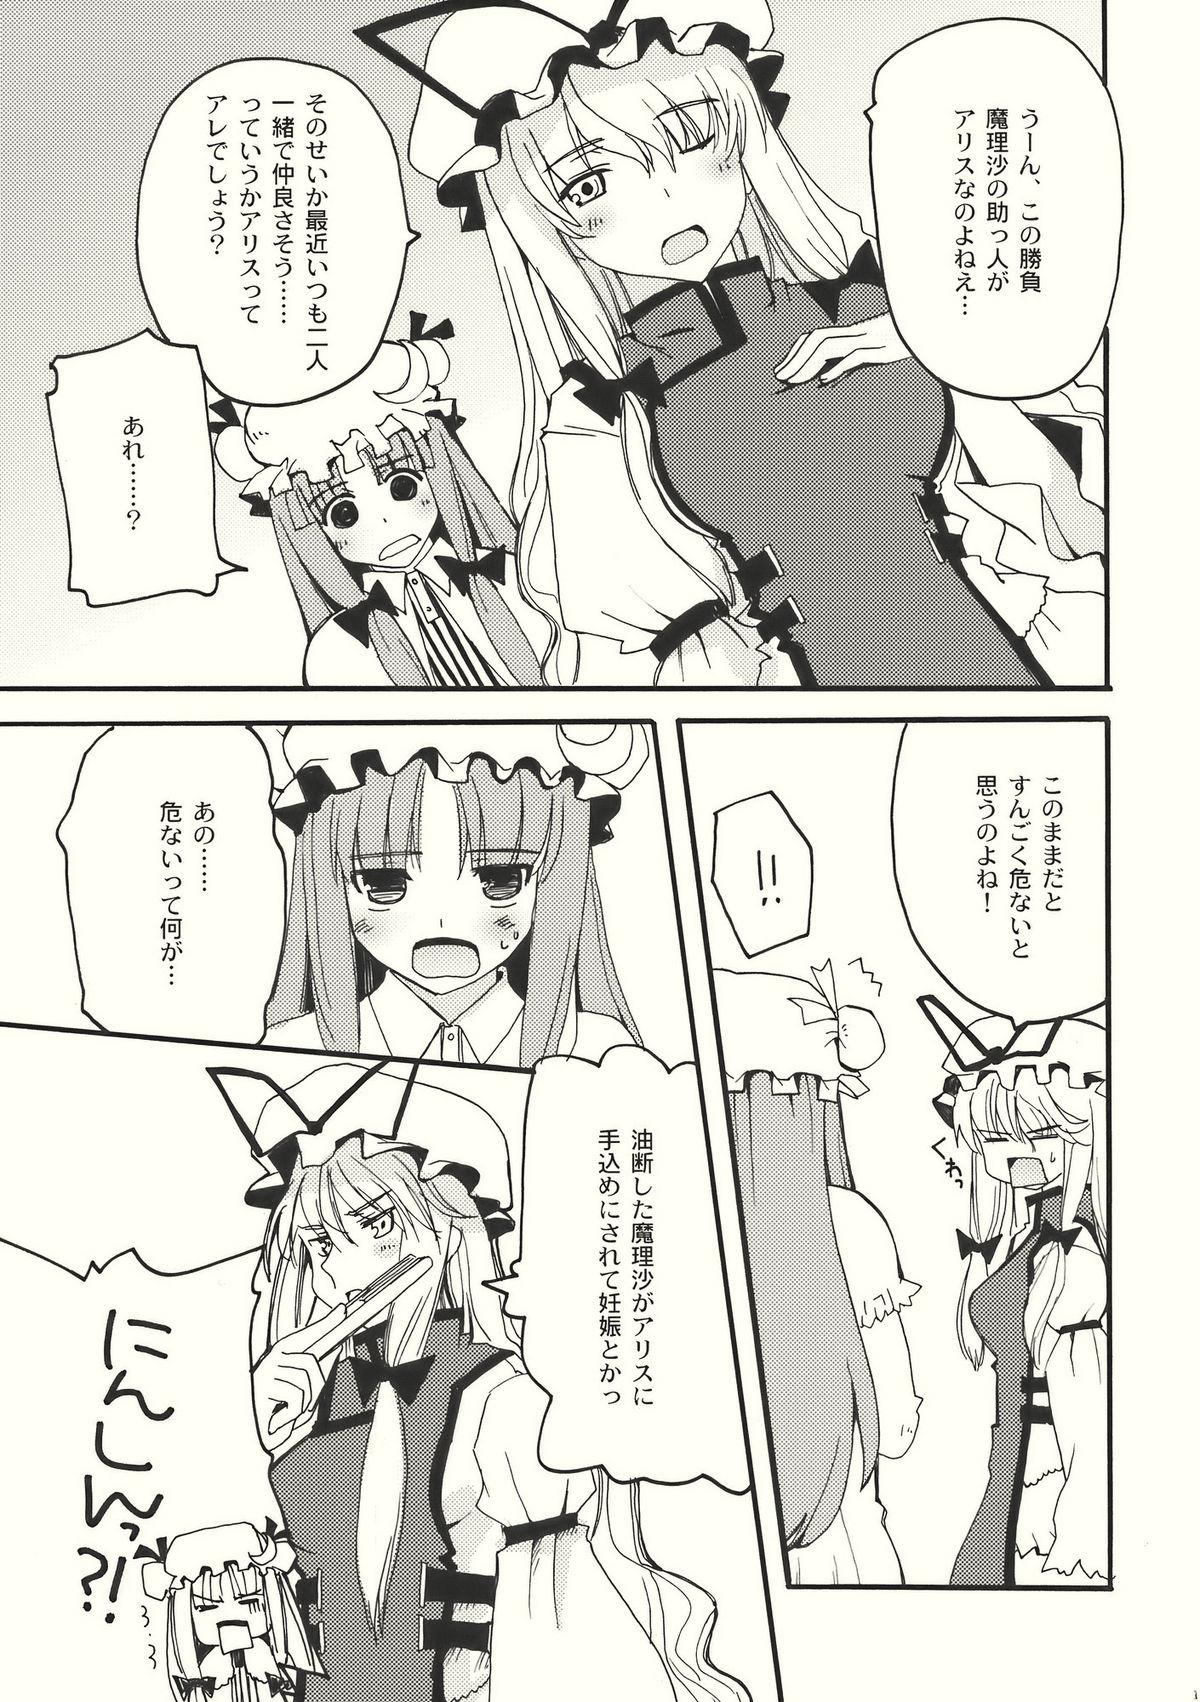 Internal Let Me Take You Home Tonight! 2 - Touhou project Gay Cut - Page 11